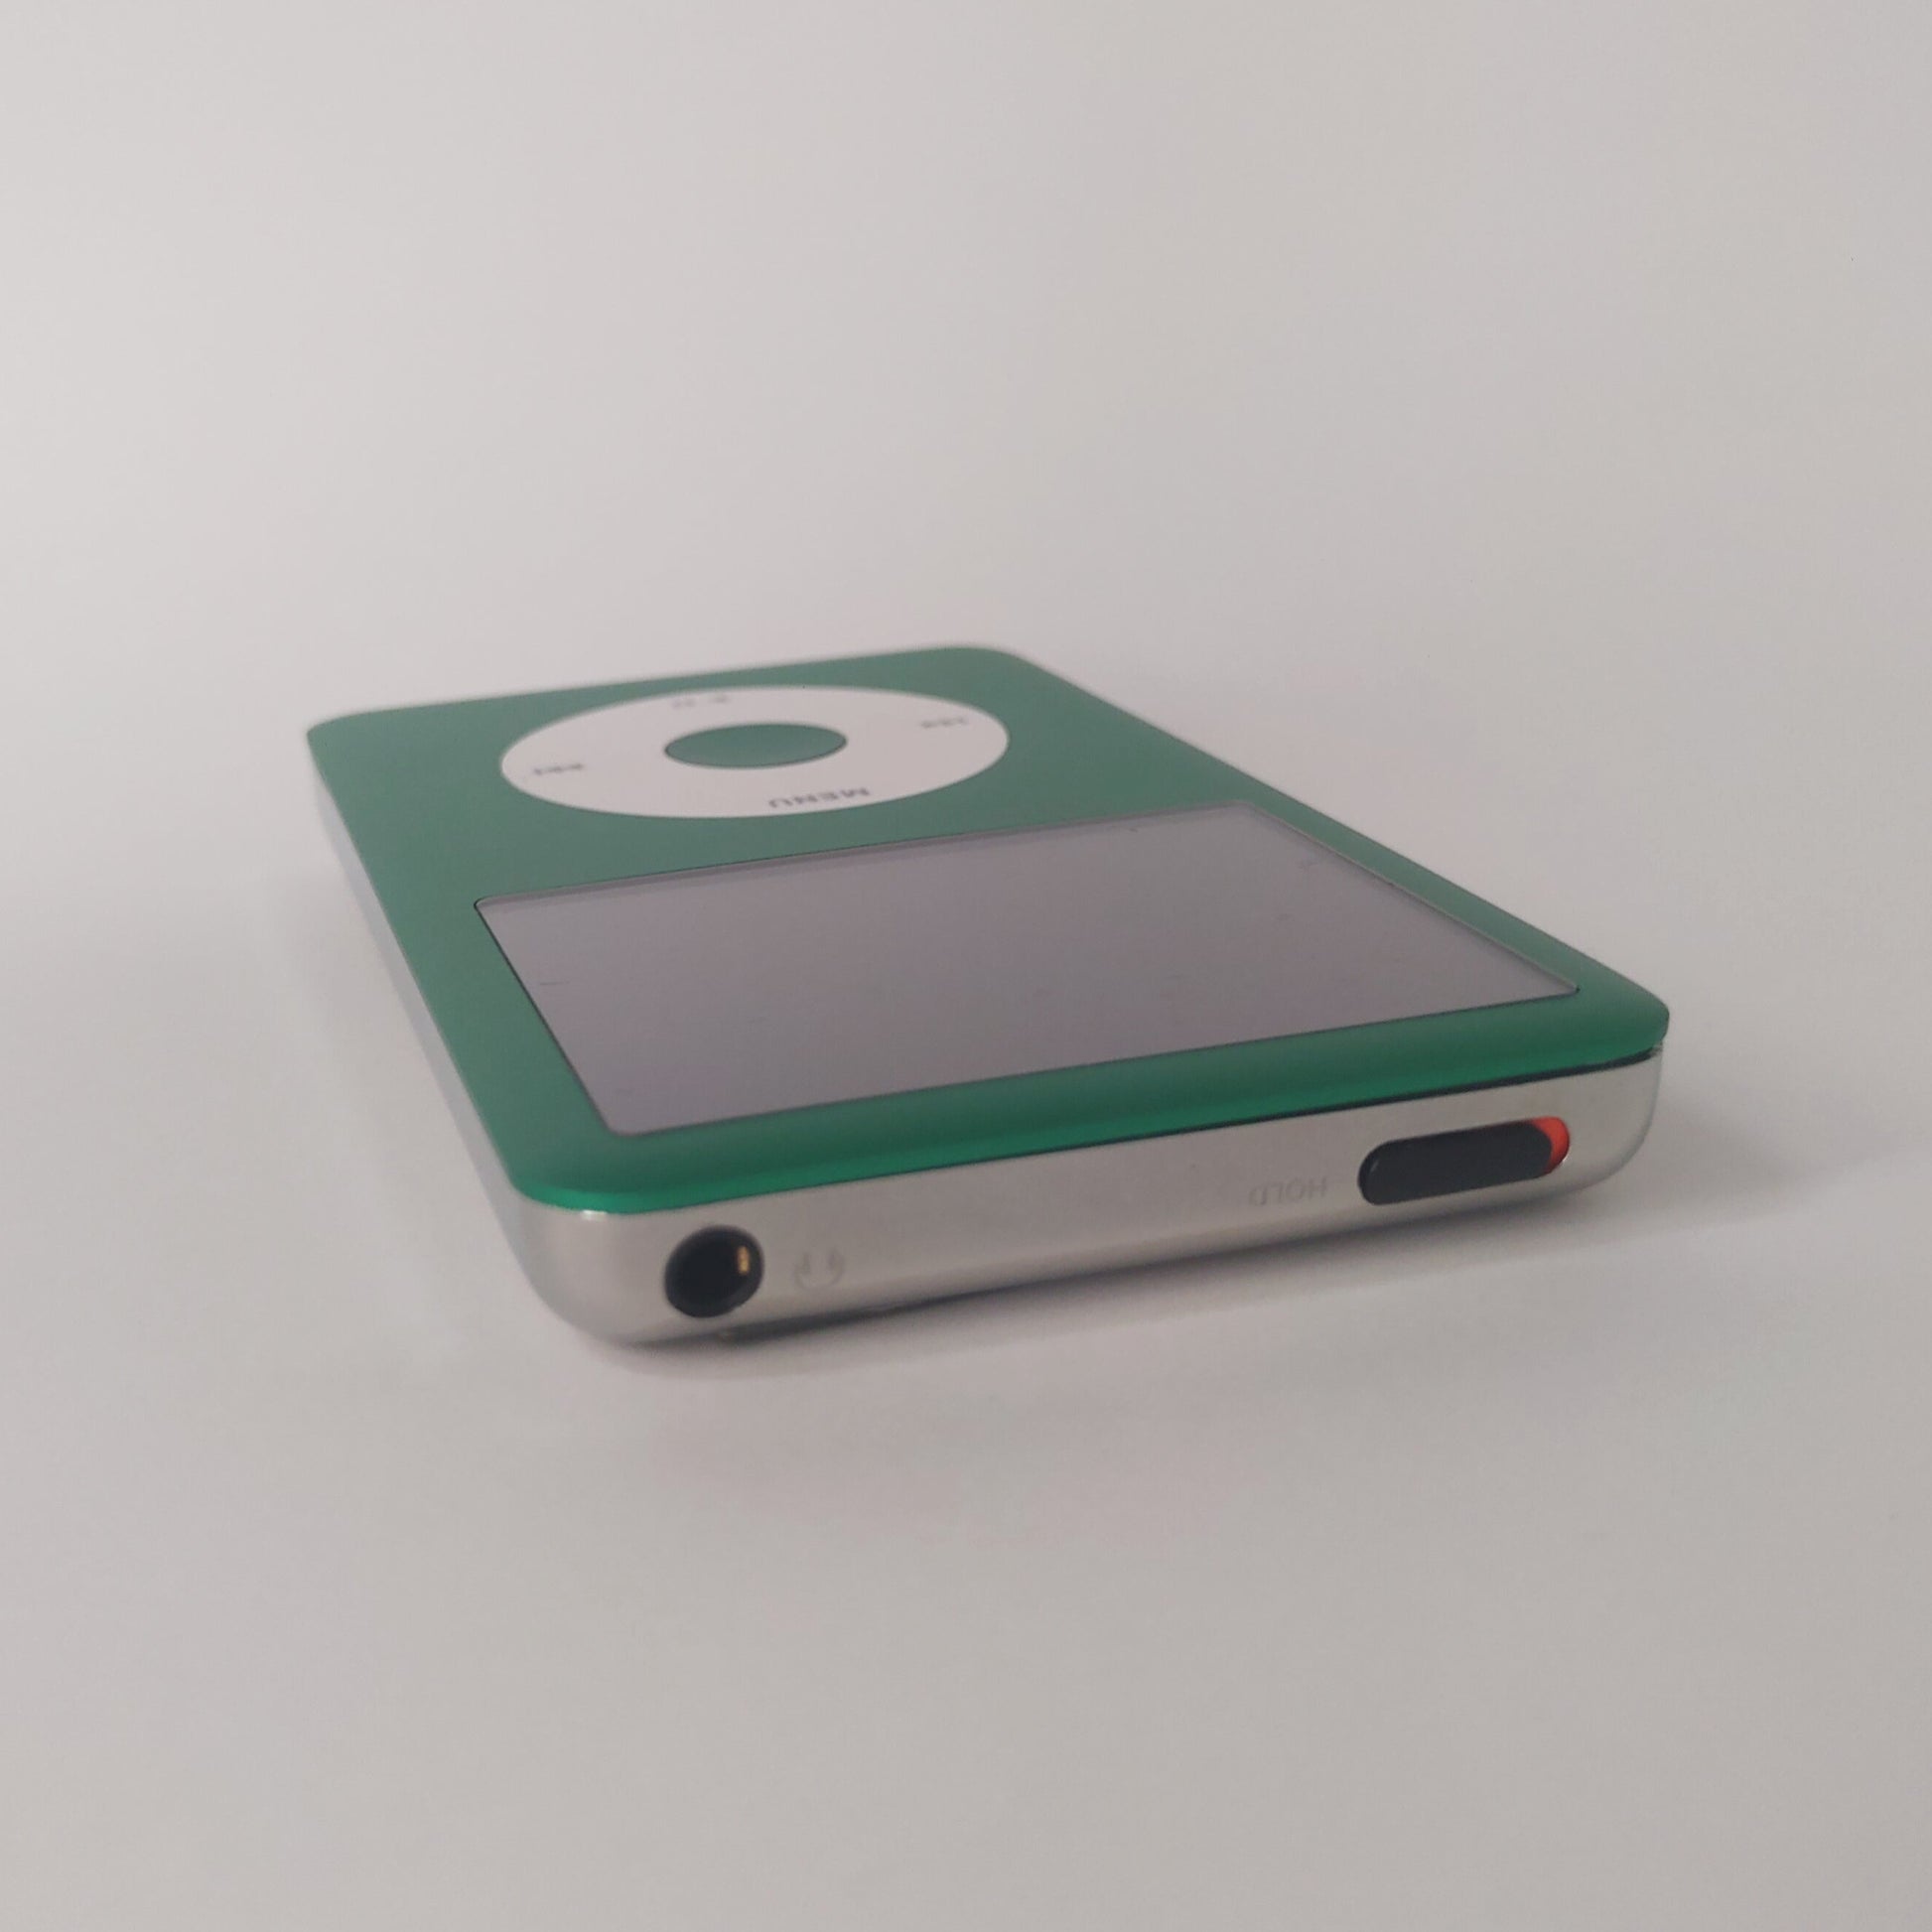 iPod classic green top view